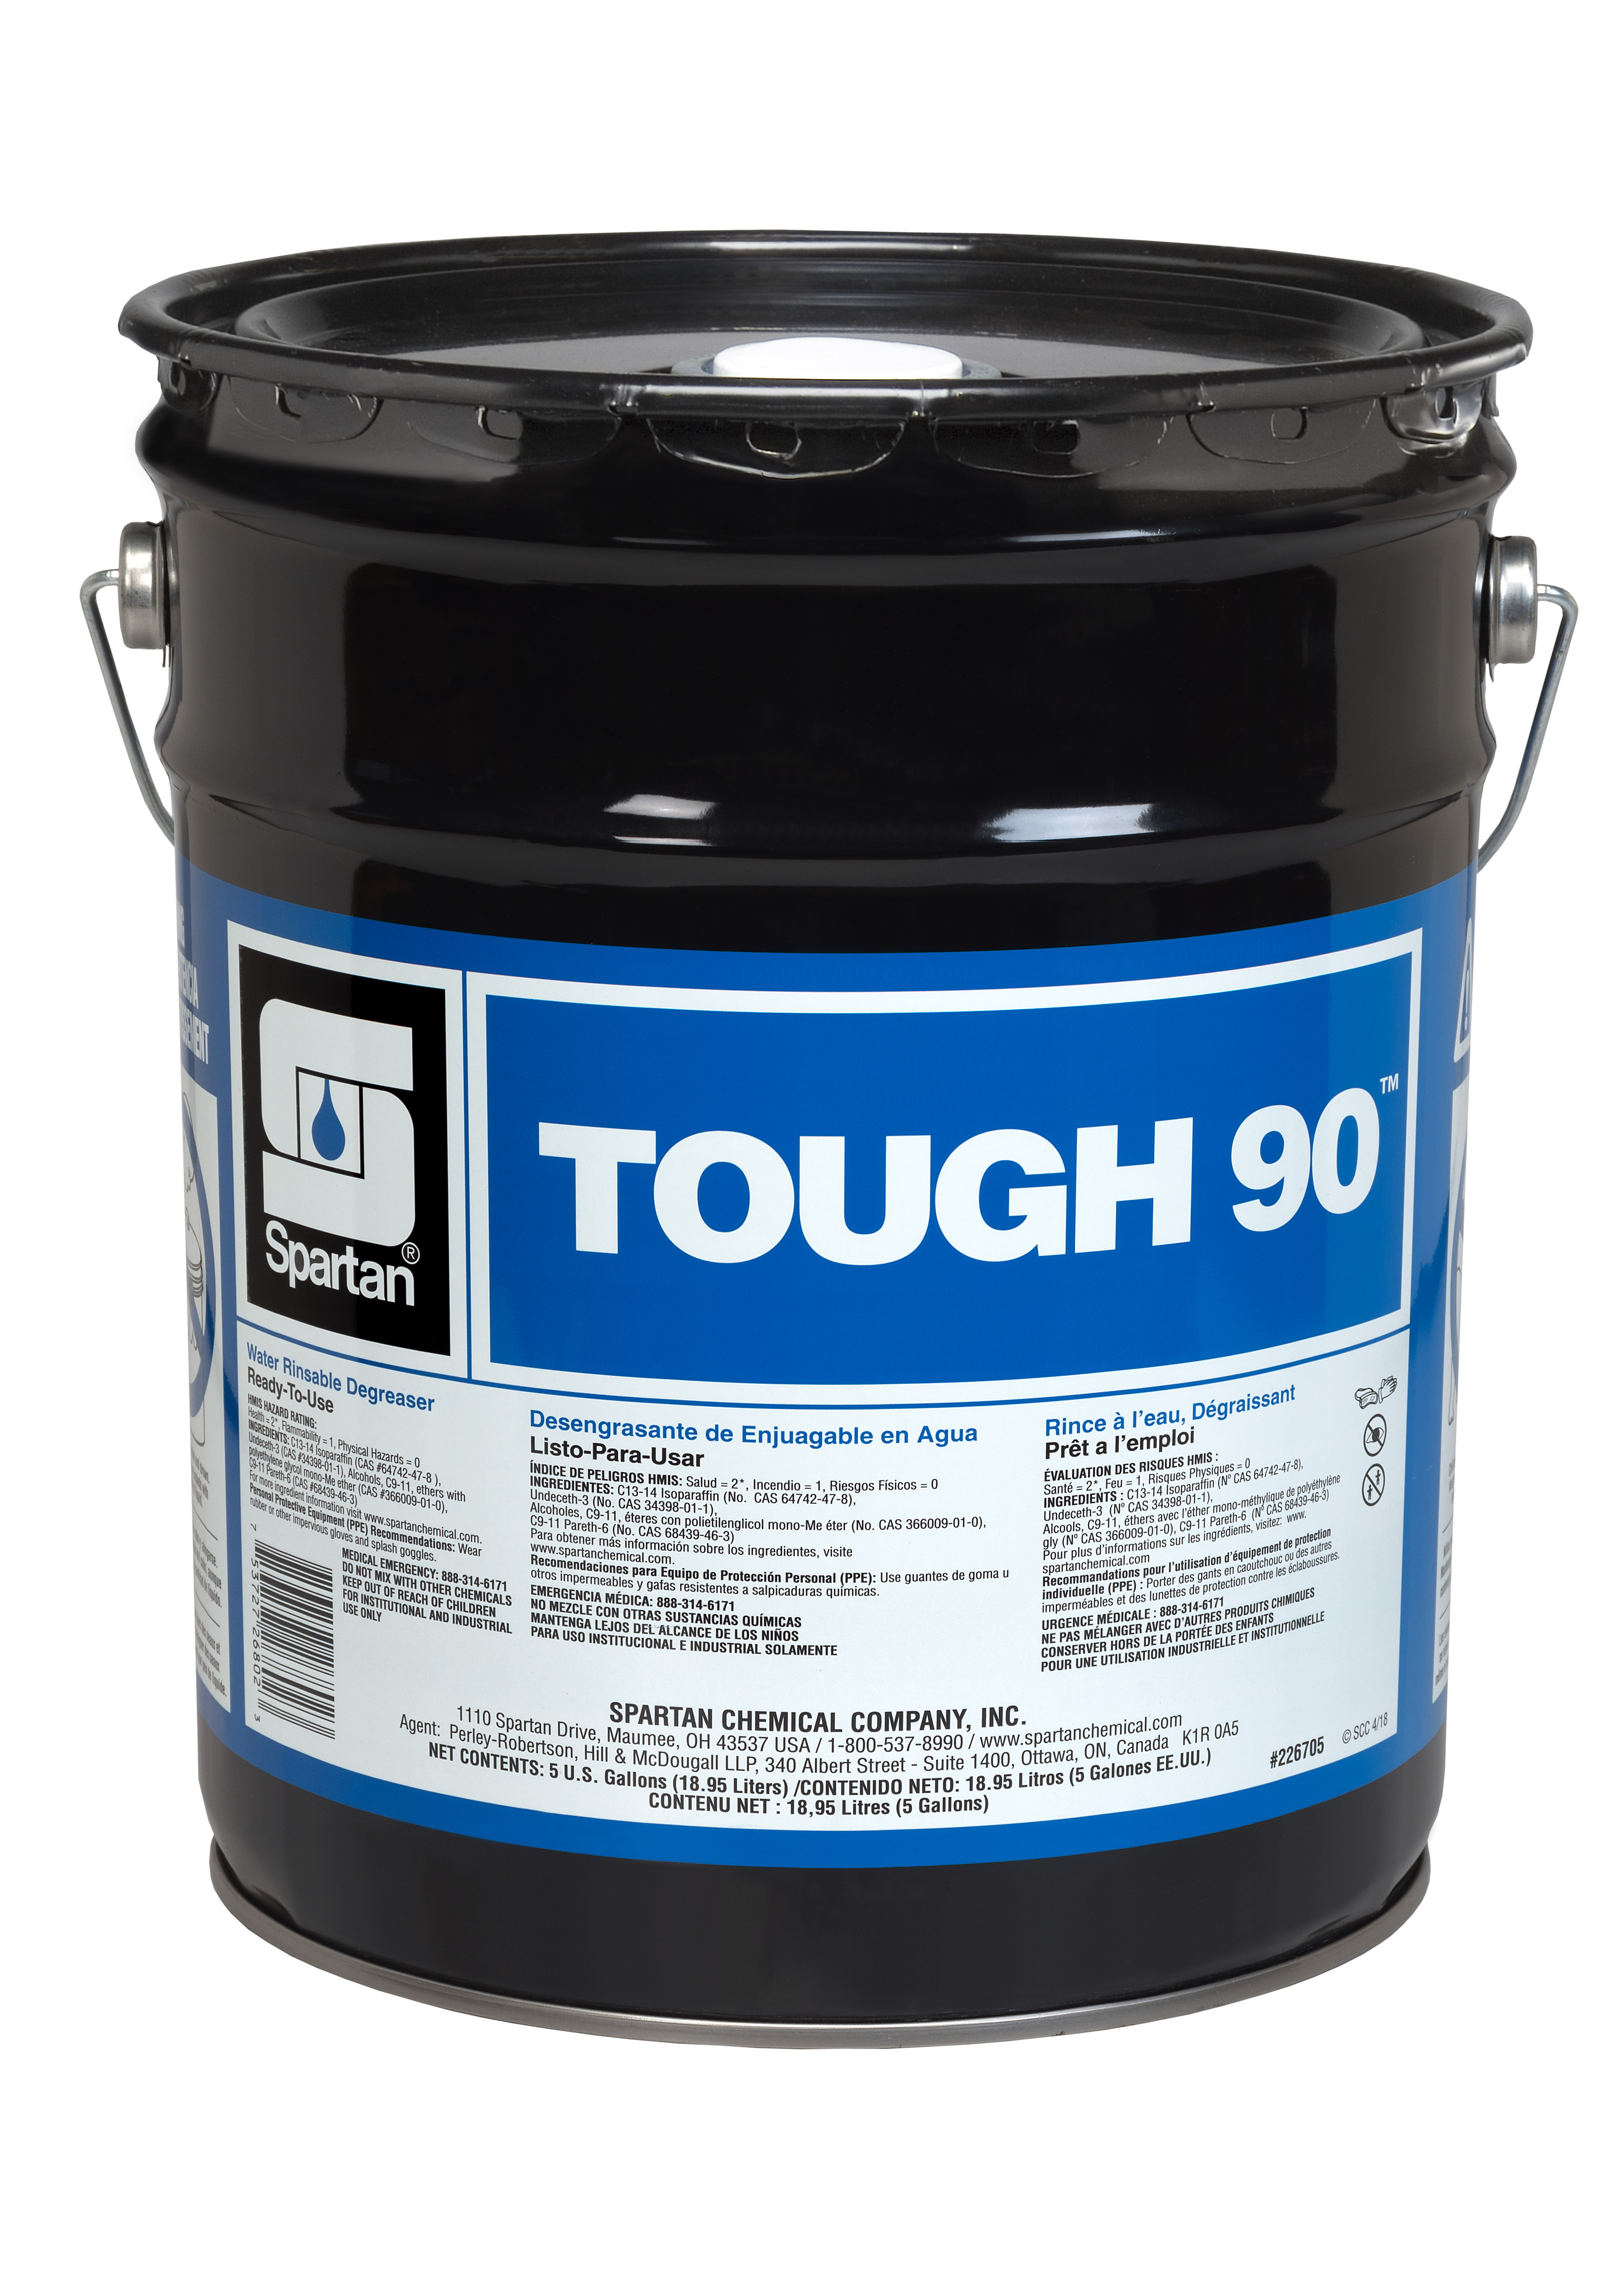 Spartan Chemical Company Tough 90, 5 GAL STEEL LINED